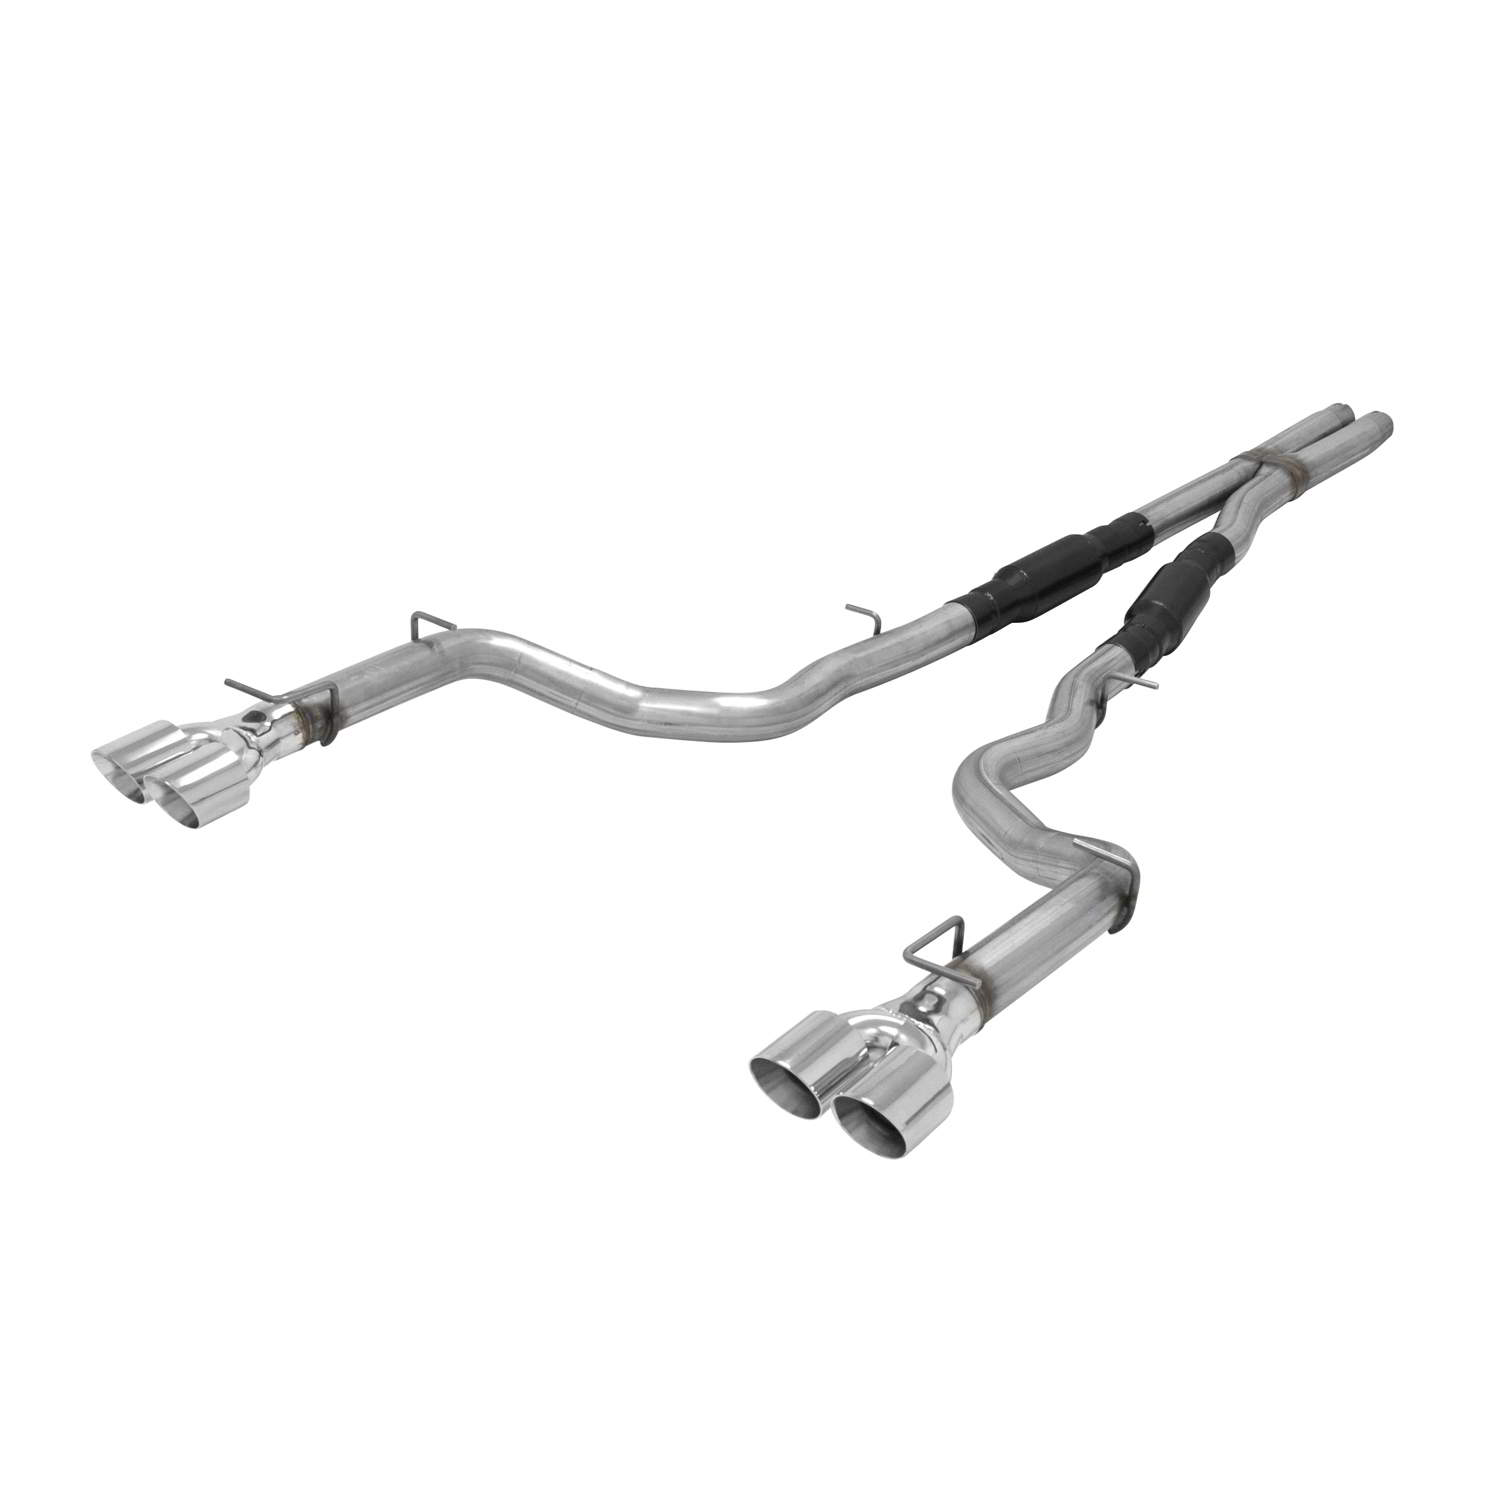 2015-2016 Dodge Challenger R/T 5.7L Flowmaster 409S Outlaw CatBack Exhaust System